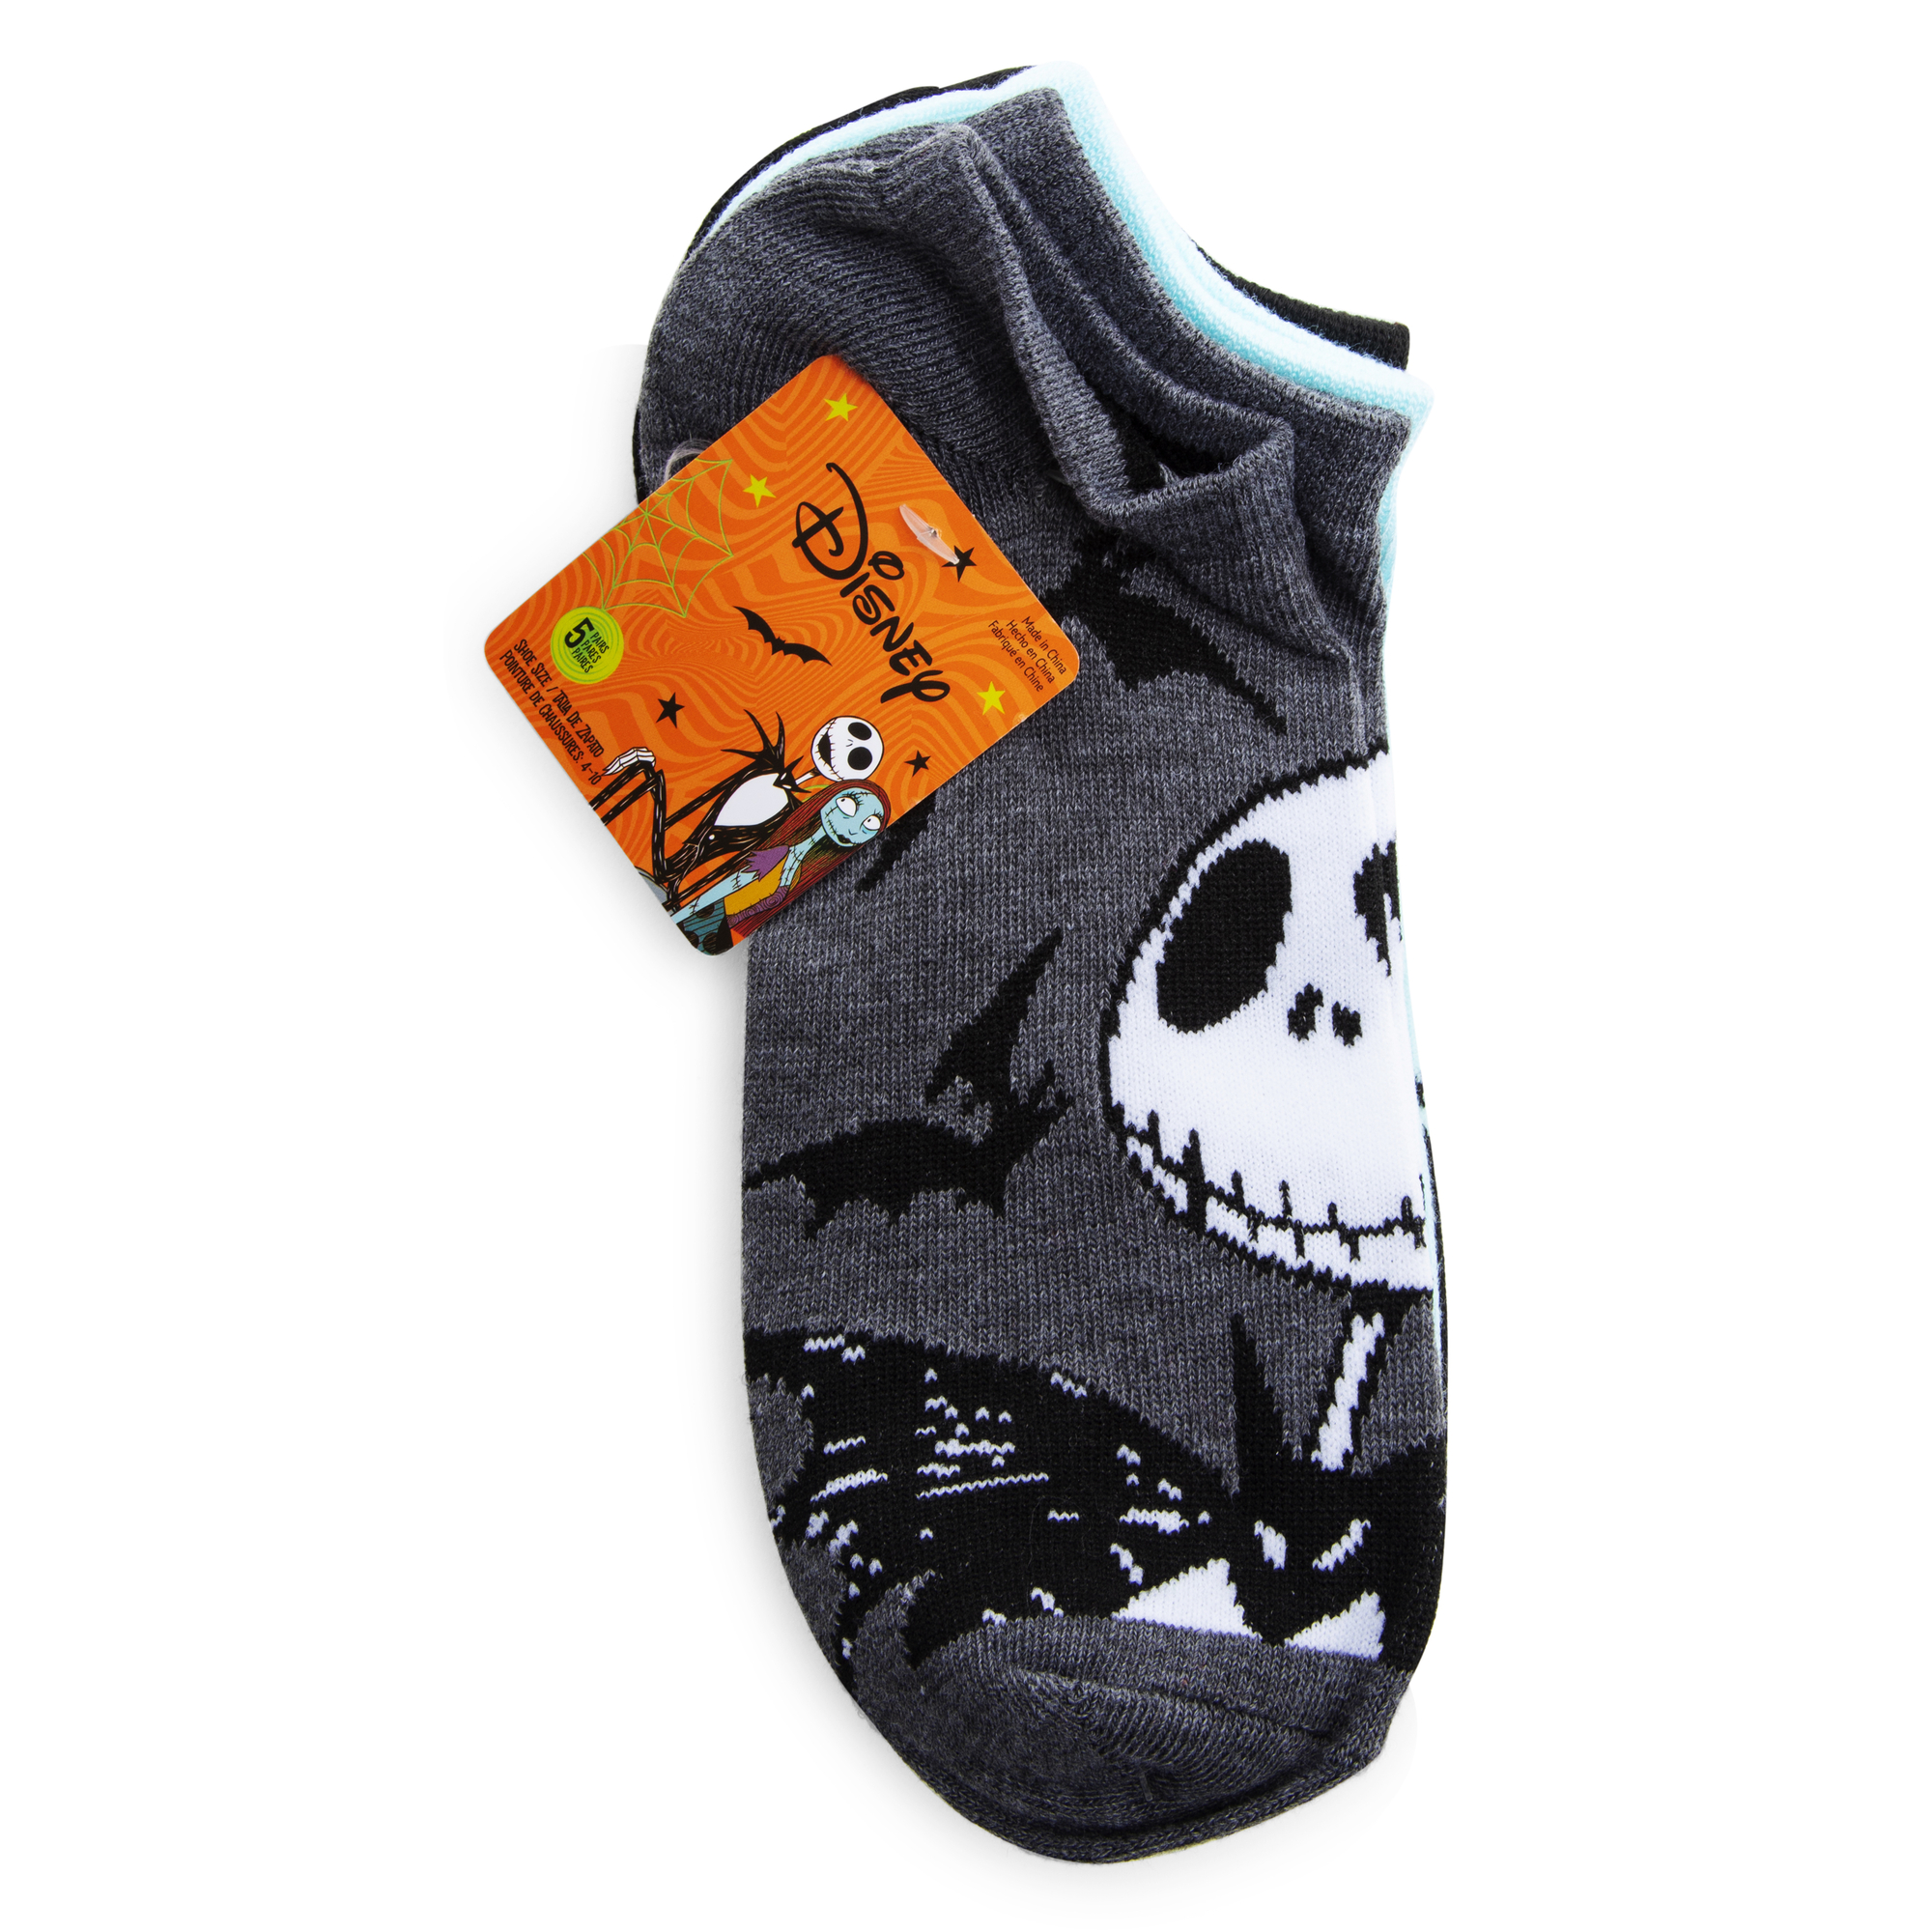 No Brand/Unknown, Accessories, 5 Pair Pack Of Nightmare Before Christmas No  Show Socks